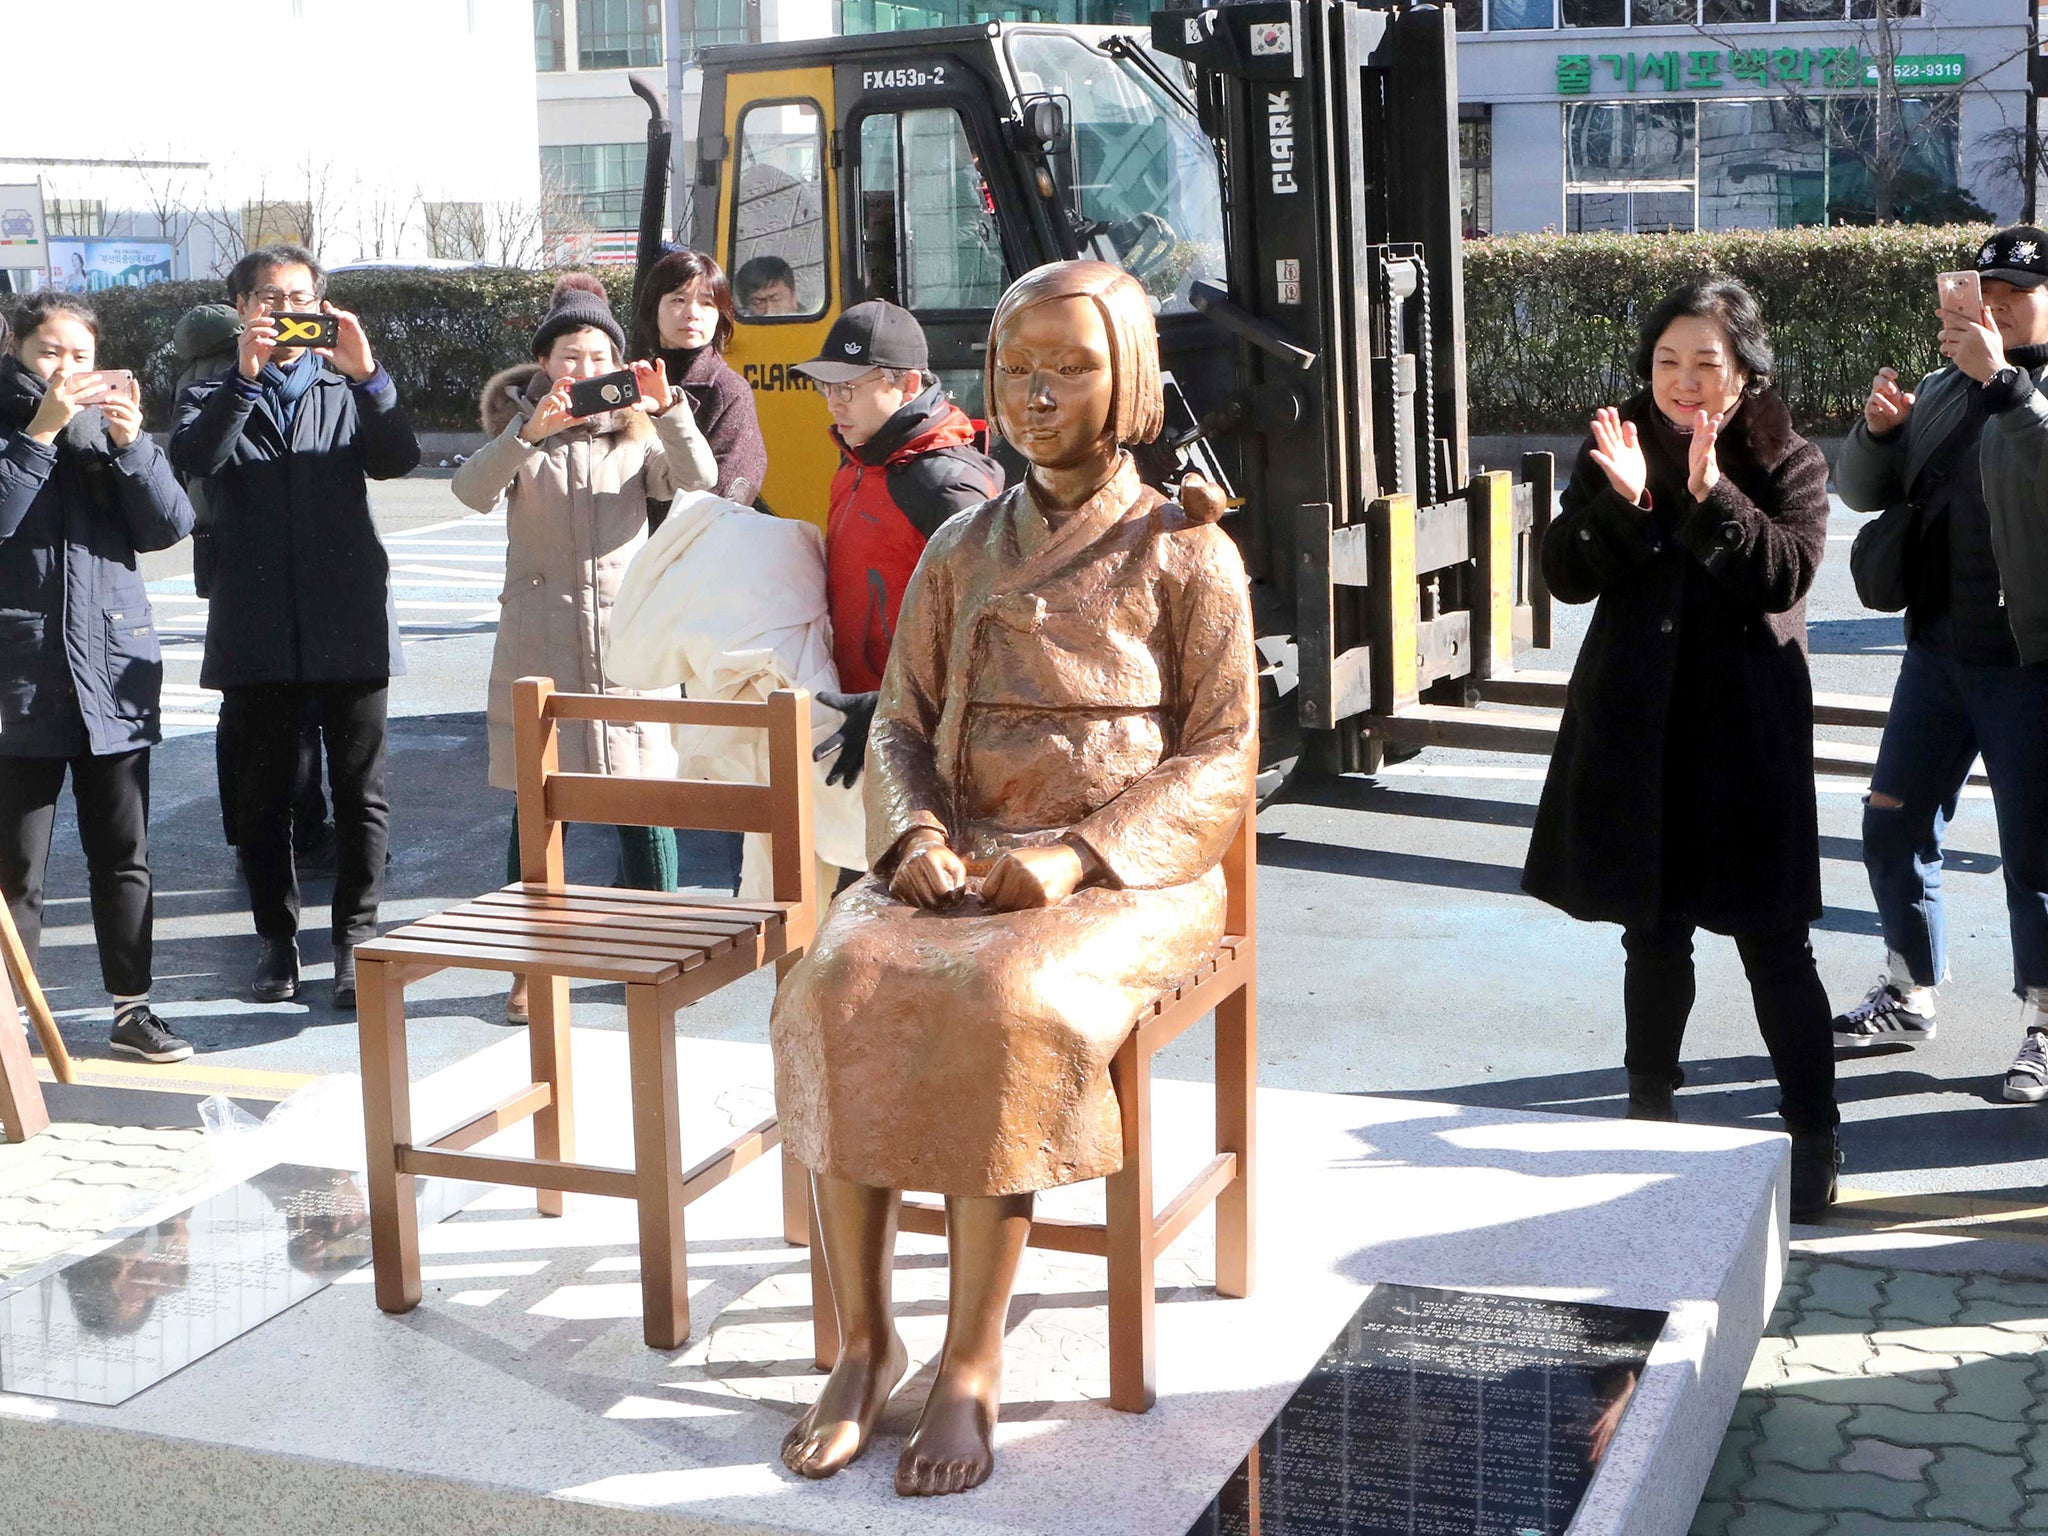 South Koreans take photos of a comfort-woman statue set up in front of the Japanese consulate in Busan